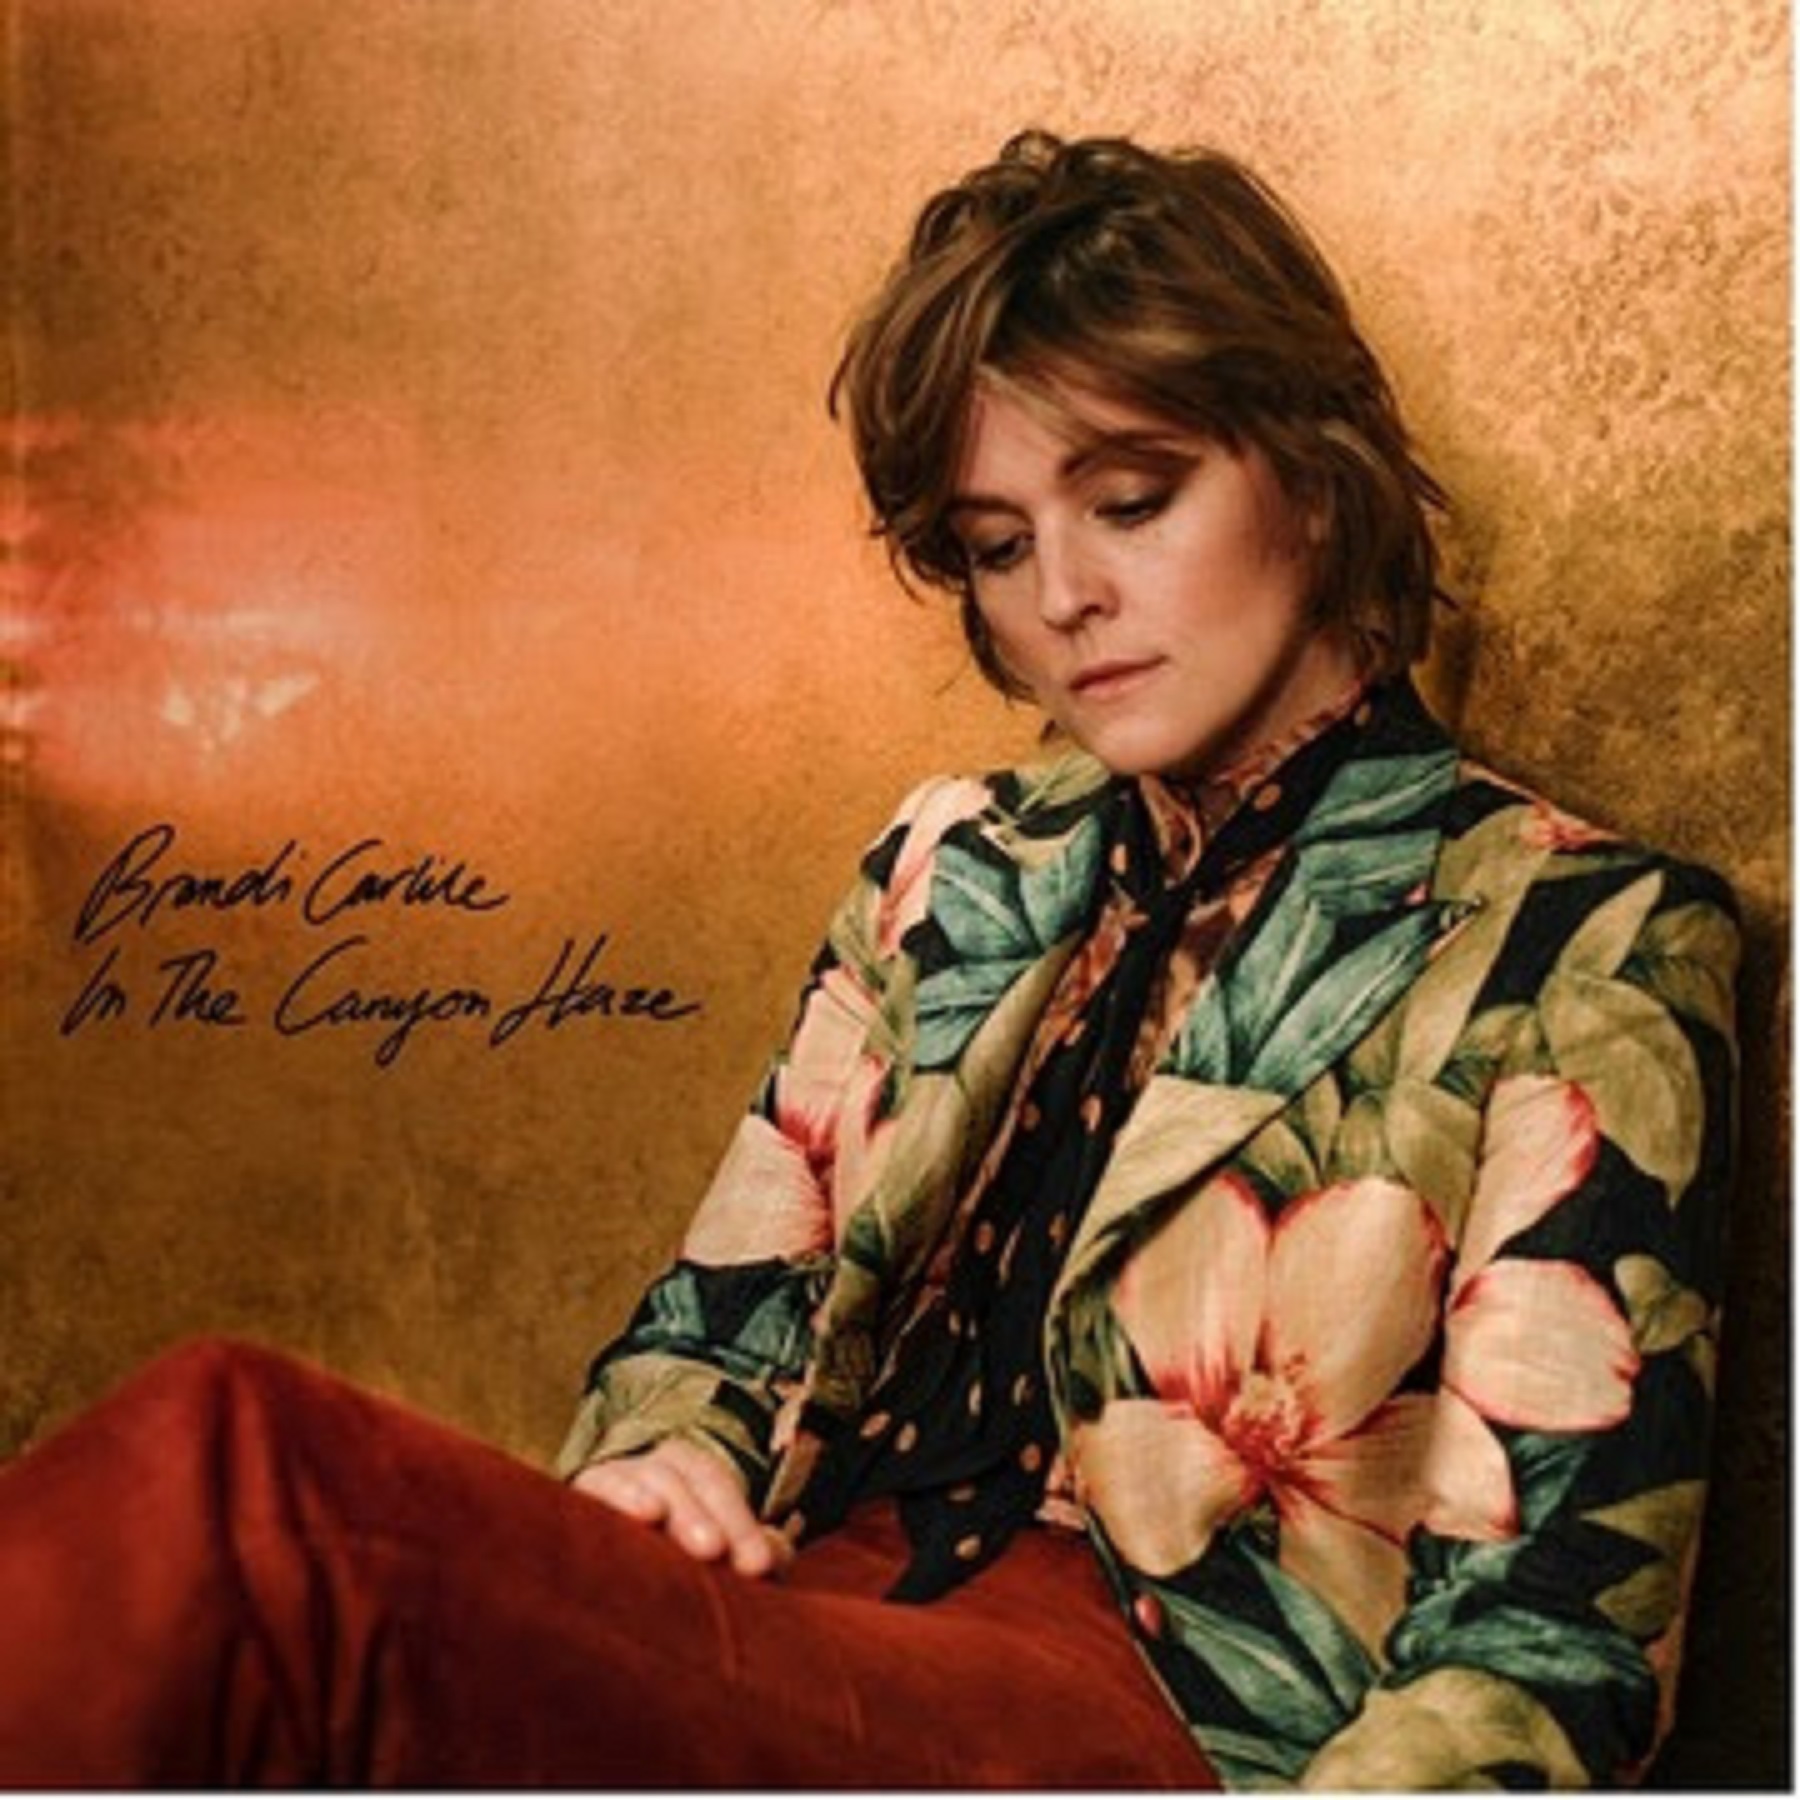 Brandi Carlile’s new deluxe album "In The Canyon Haze" out today, IMAX Live concert event tonight